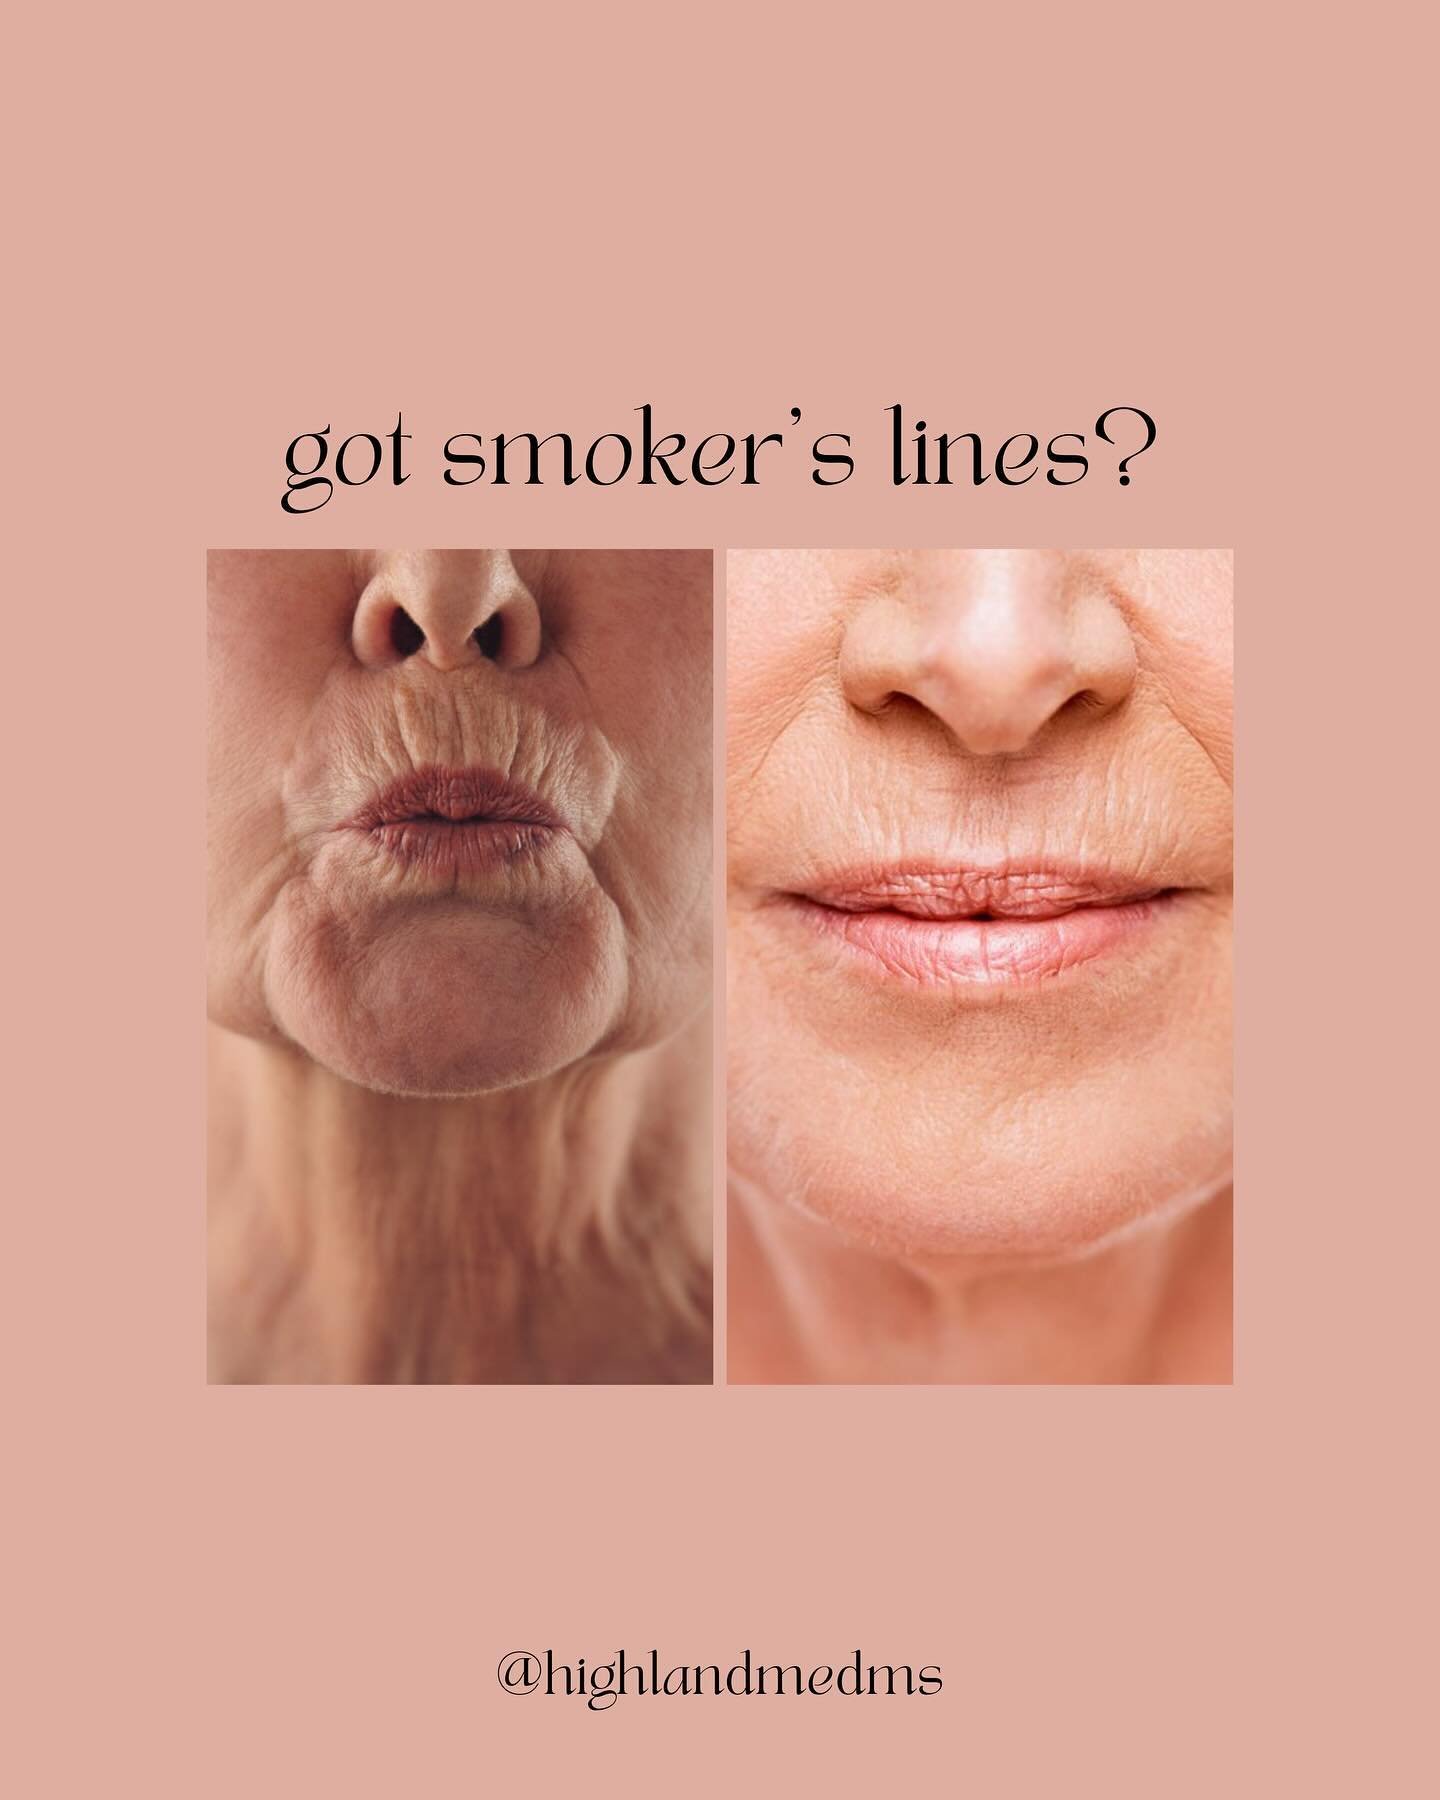 Keep your kisses, ditch the lines! 😘 Say goodbye to smoker&rsquo;s lines and hello to smooth smiles!

🔗 Link in bio to book!! 

.
.

👩🏻&zwj;⚕️Sara Courtney, DNP, FNP-BC
(@Saracourtney.np)
👩🏽&zwj;⚕️Itzel Barroso, FNP-C
(@itzelbarroso_np)
🧖🏽&zw